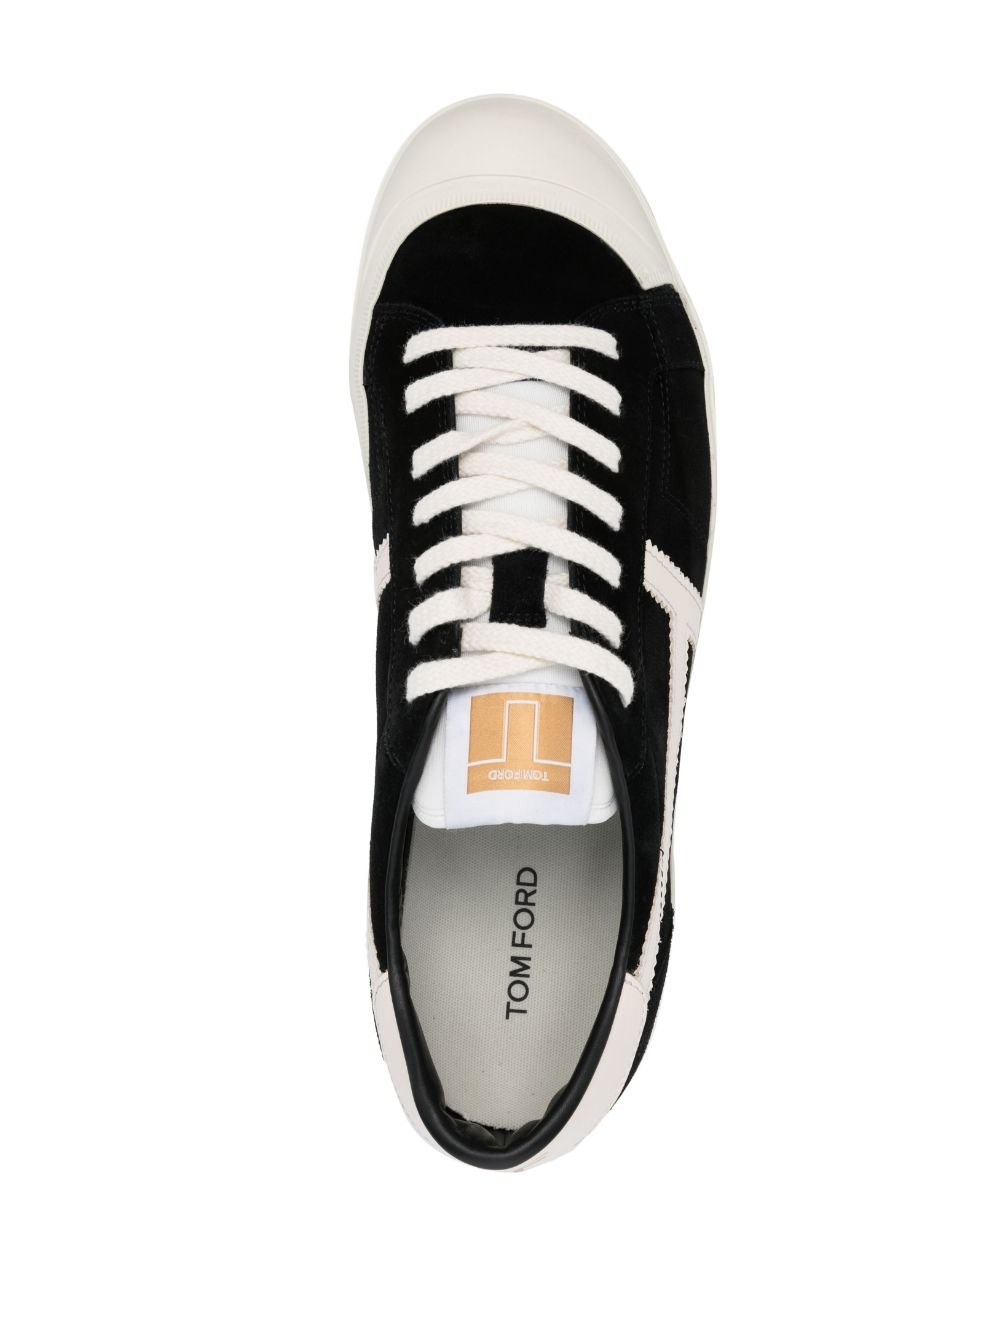 Tom FordJarvis Sneakers at Fashion Clinic